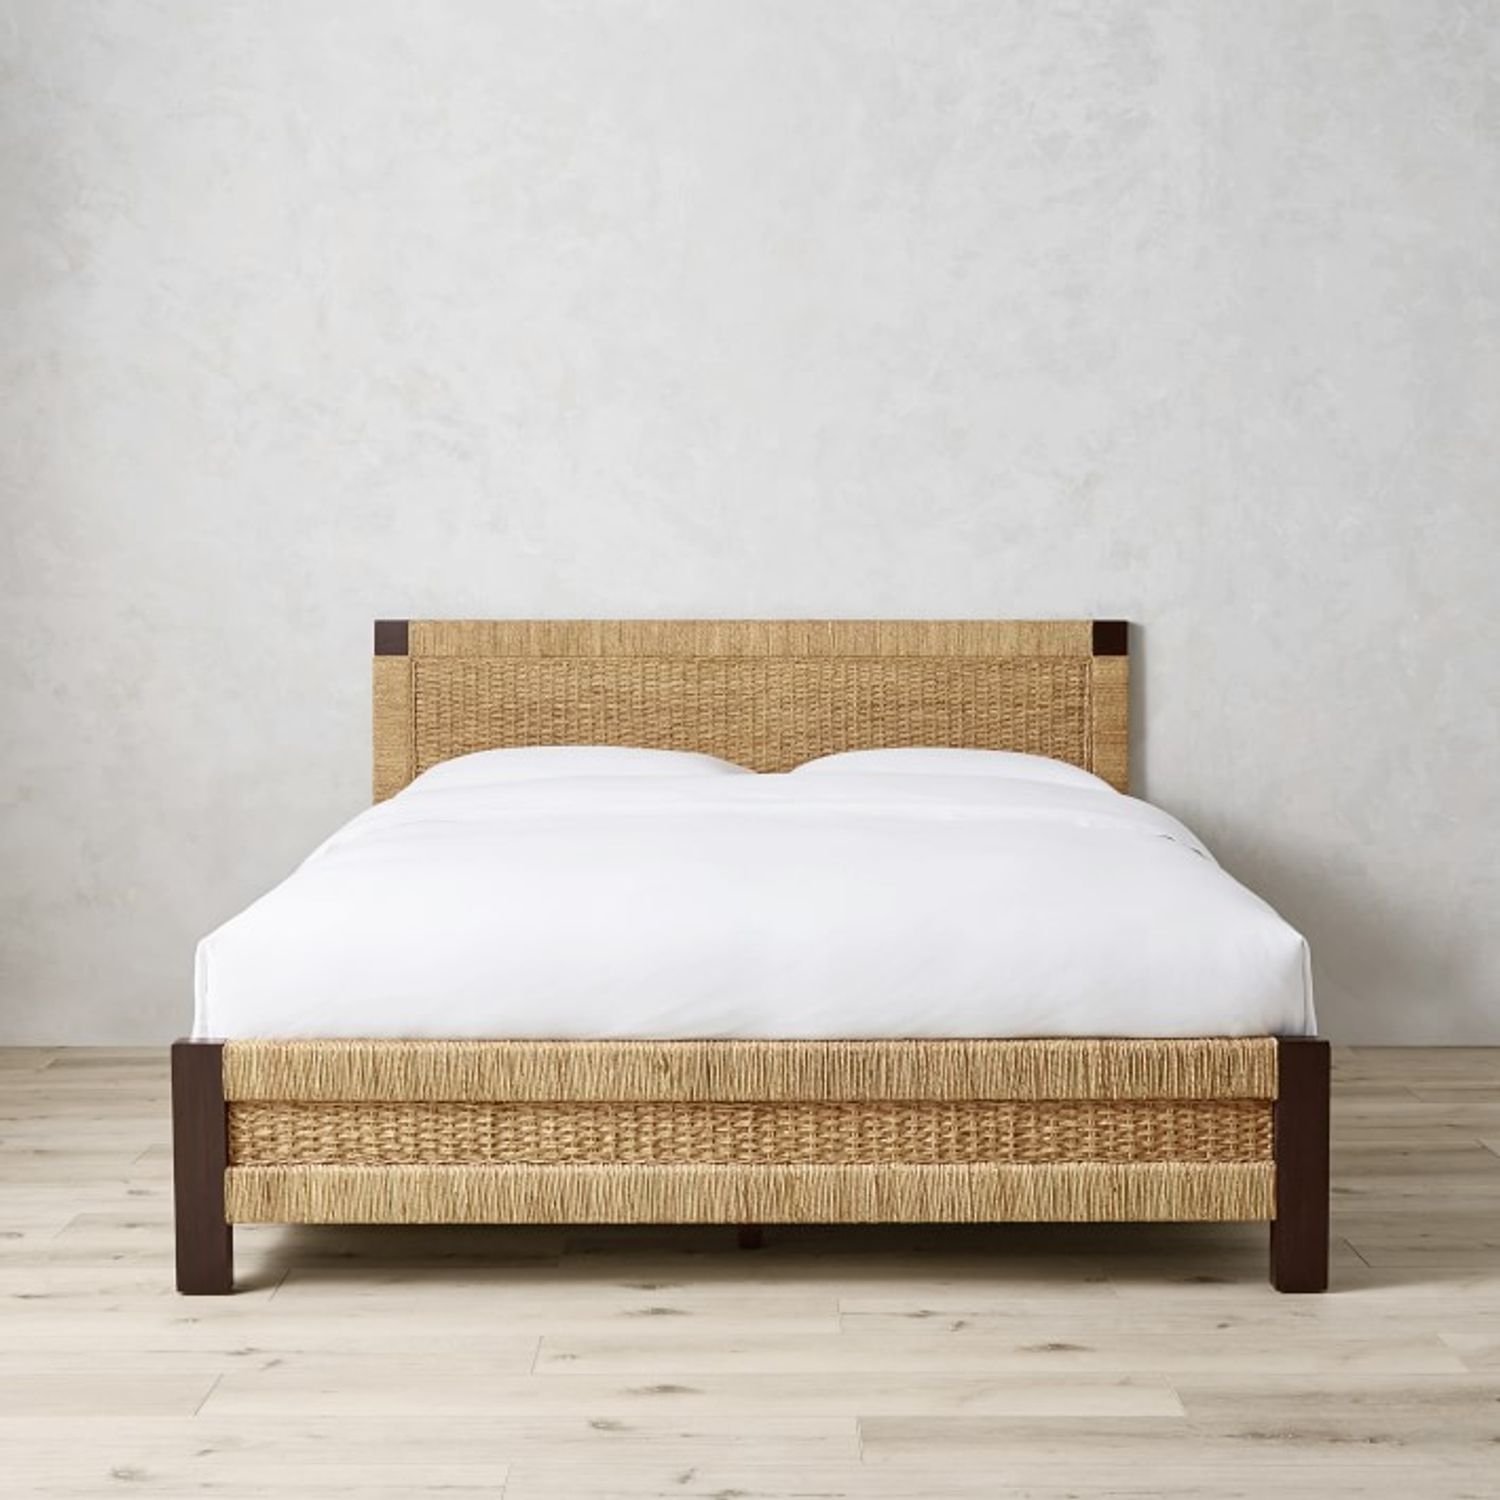 Shop Amalfi Woven Bed from Williams-Sonoma on Openhaus